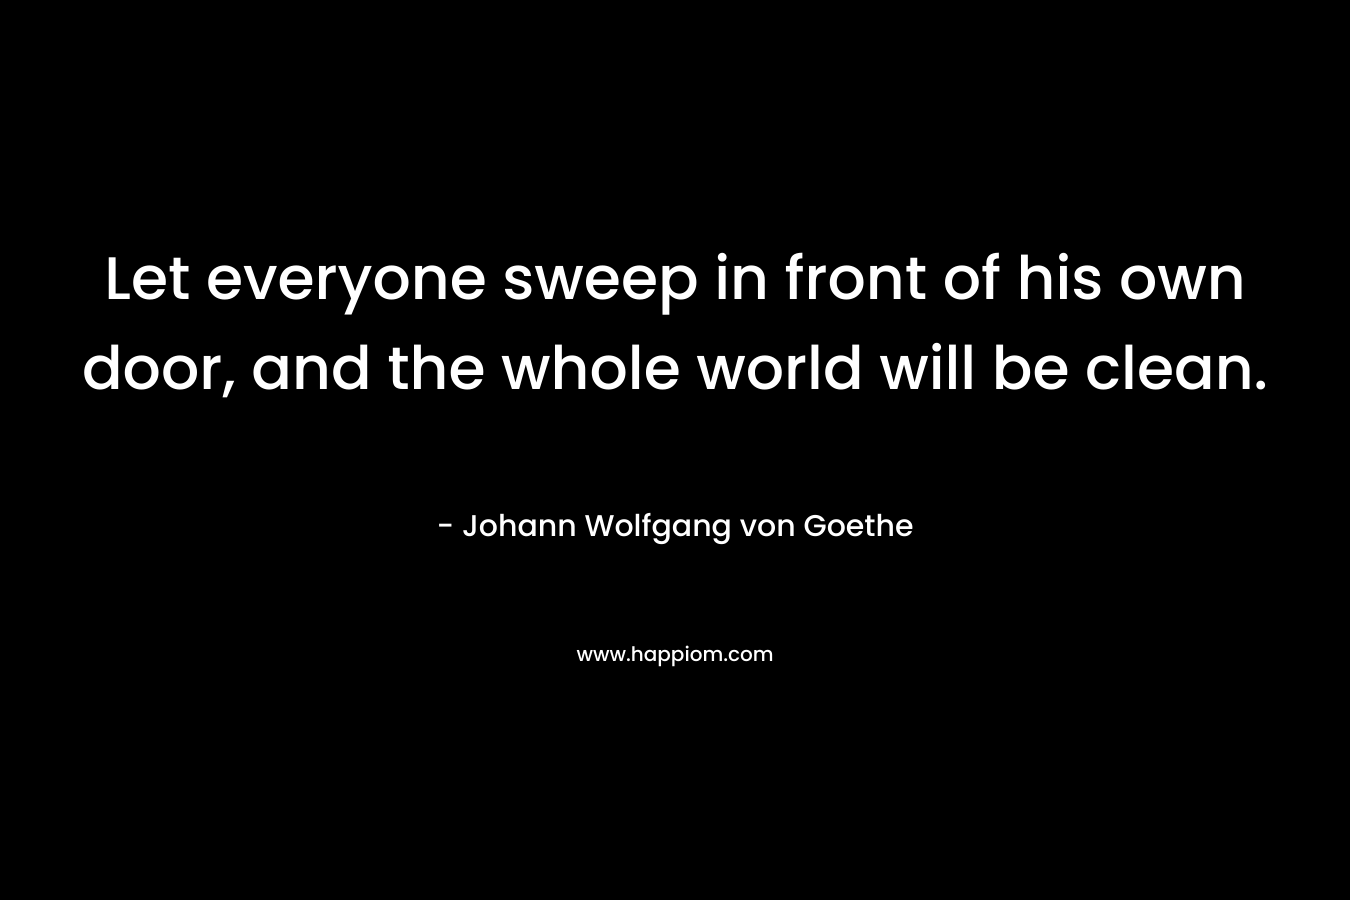 Let everyone sweep in front of his own door, and the whole world will be clean.